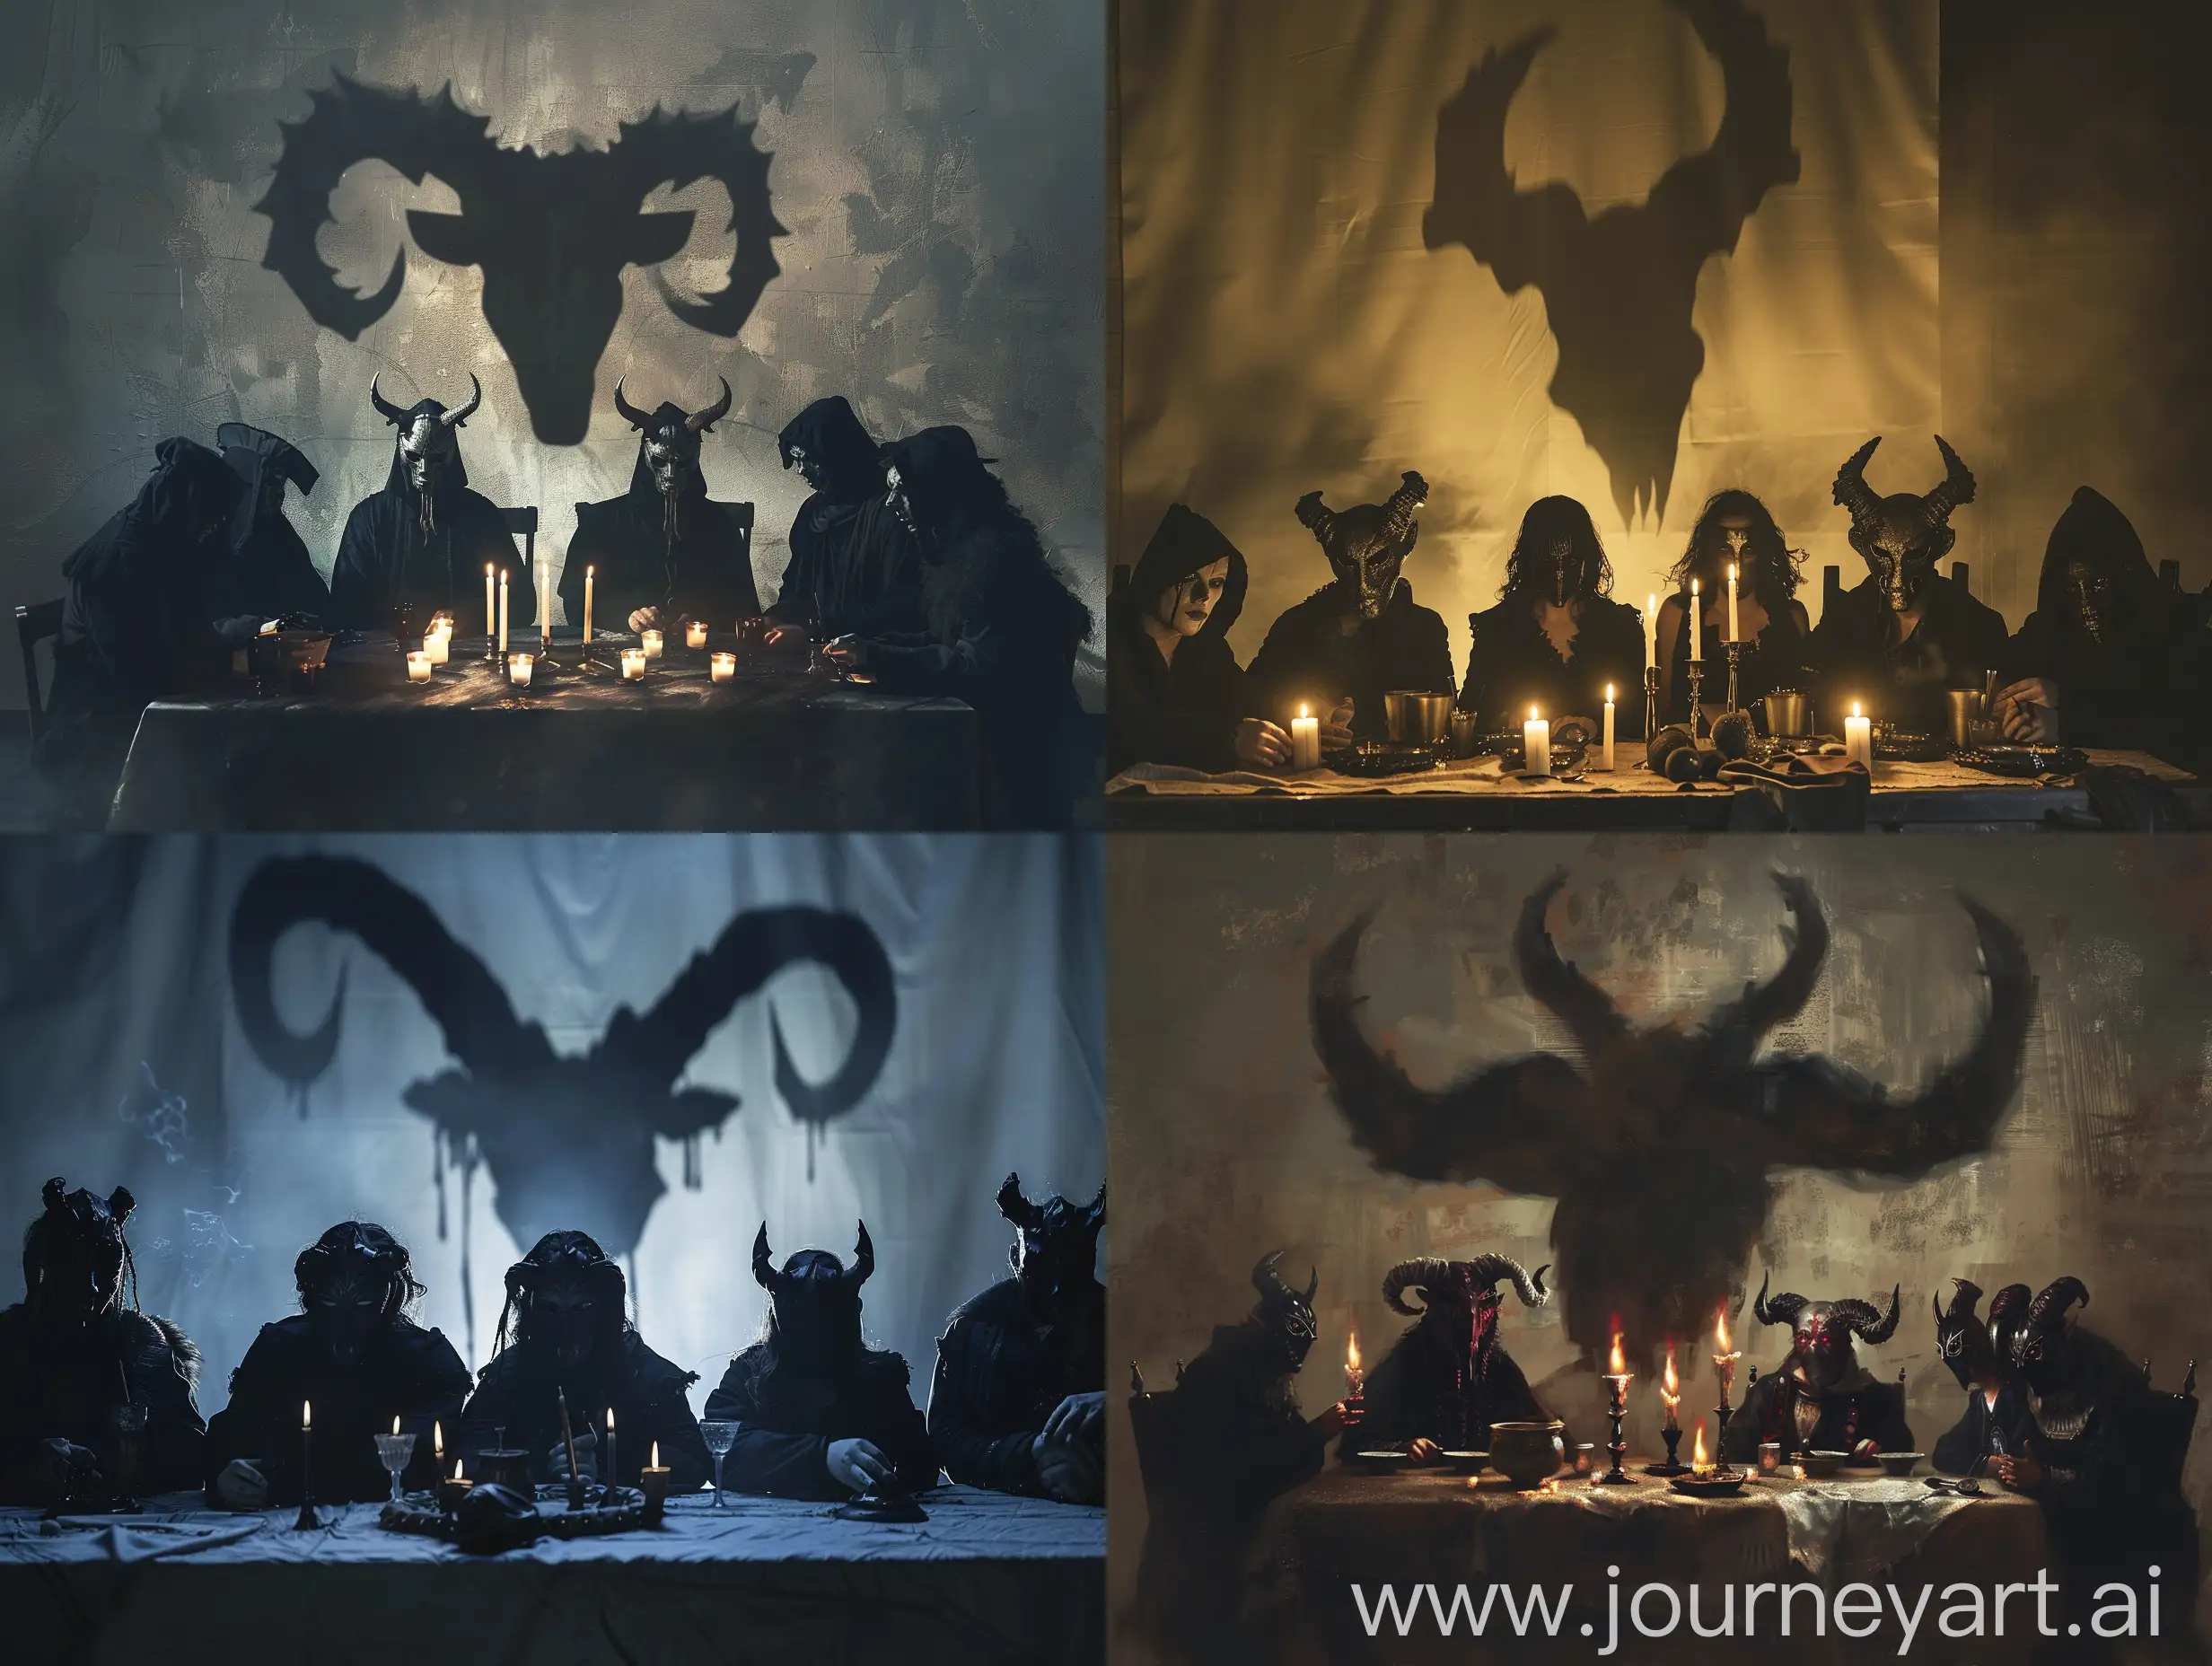 Mysterious-Ritual-Gathering-with-Horned-Shadow-Figure-and-Candles